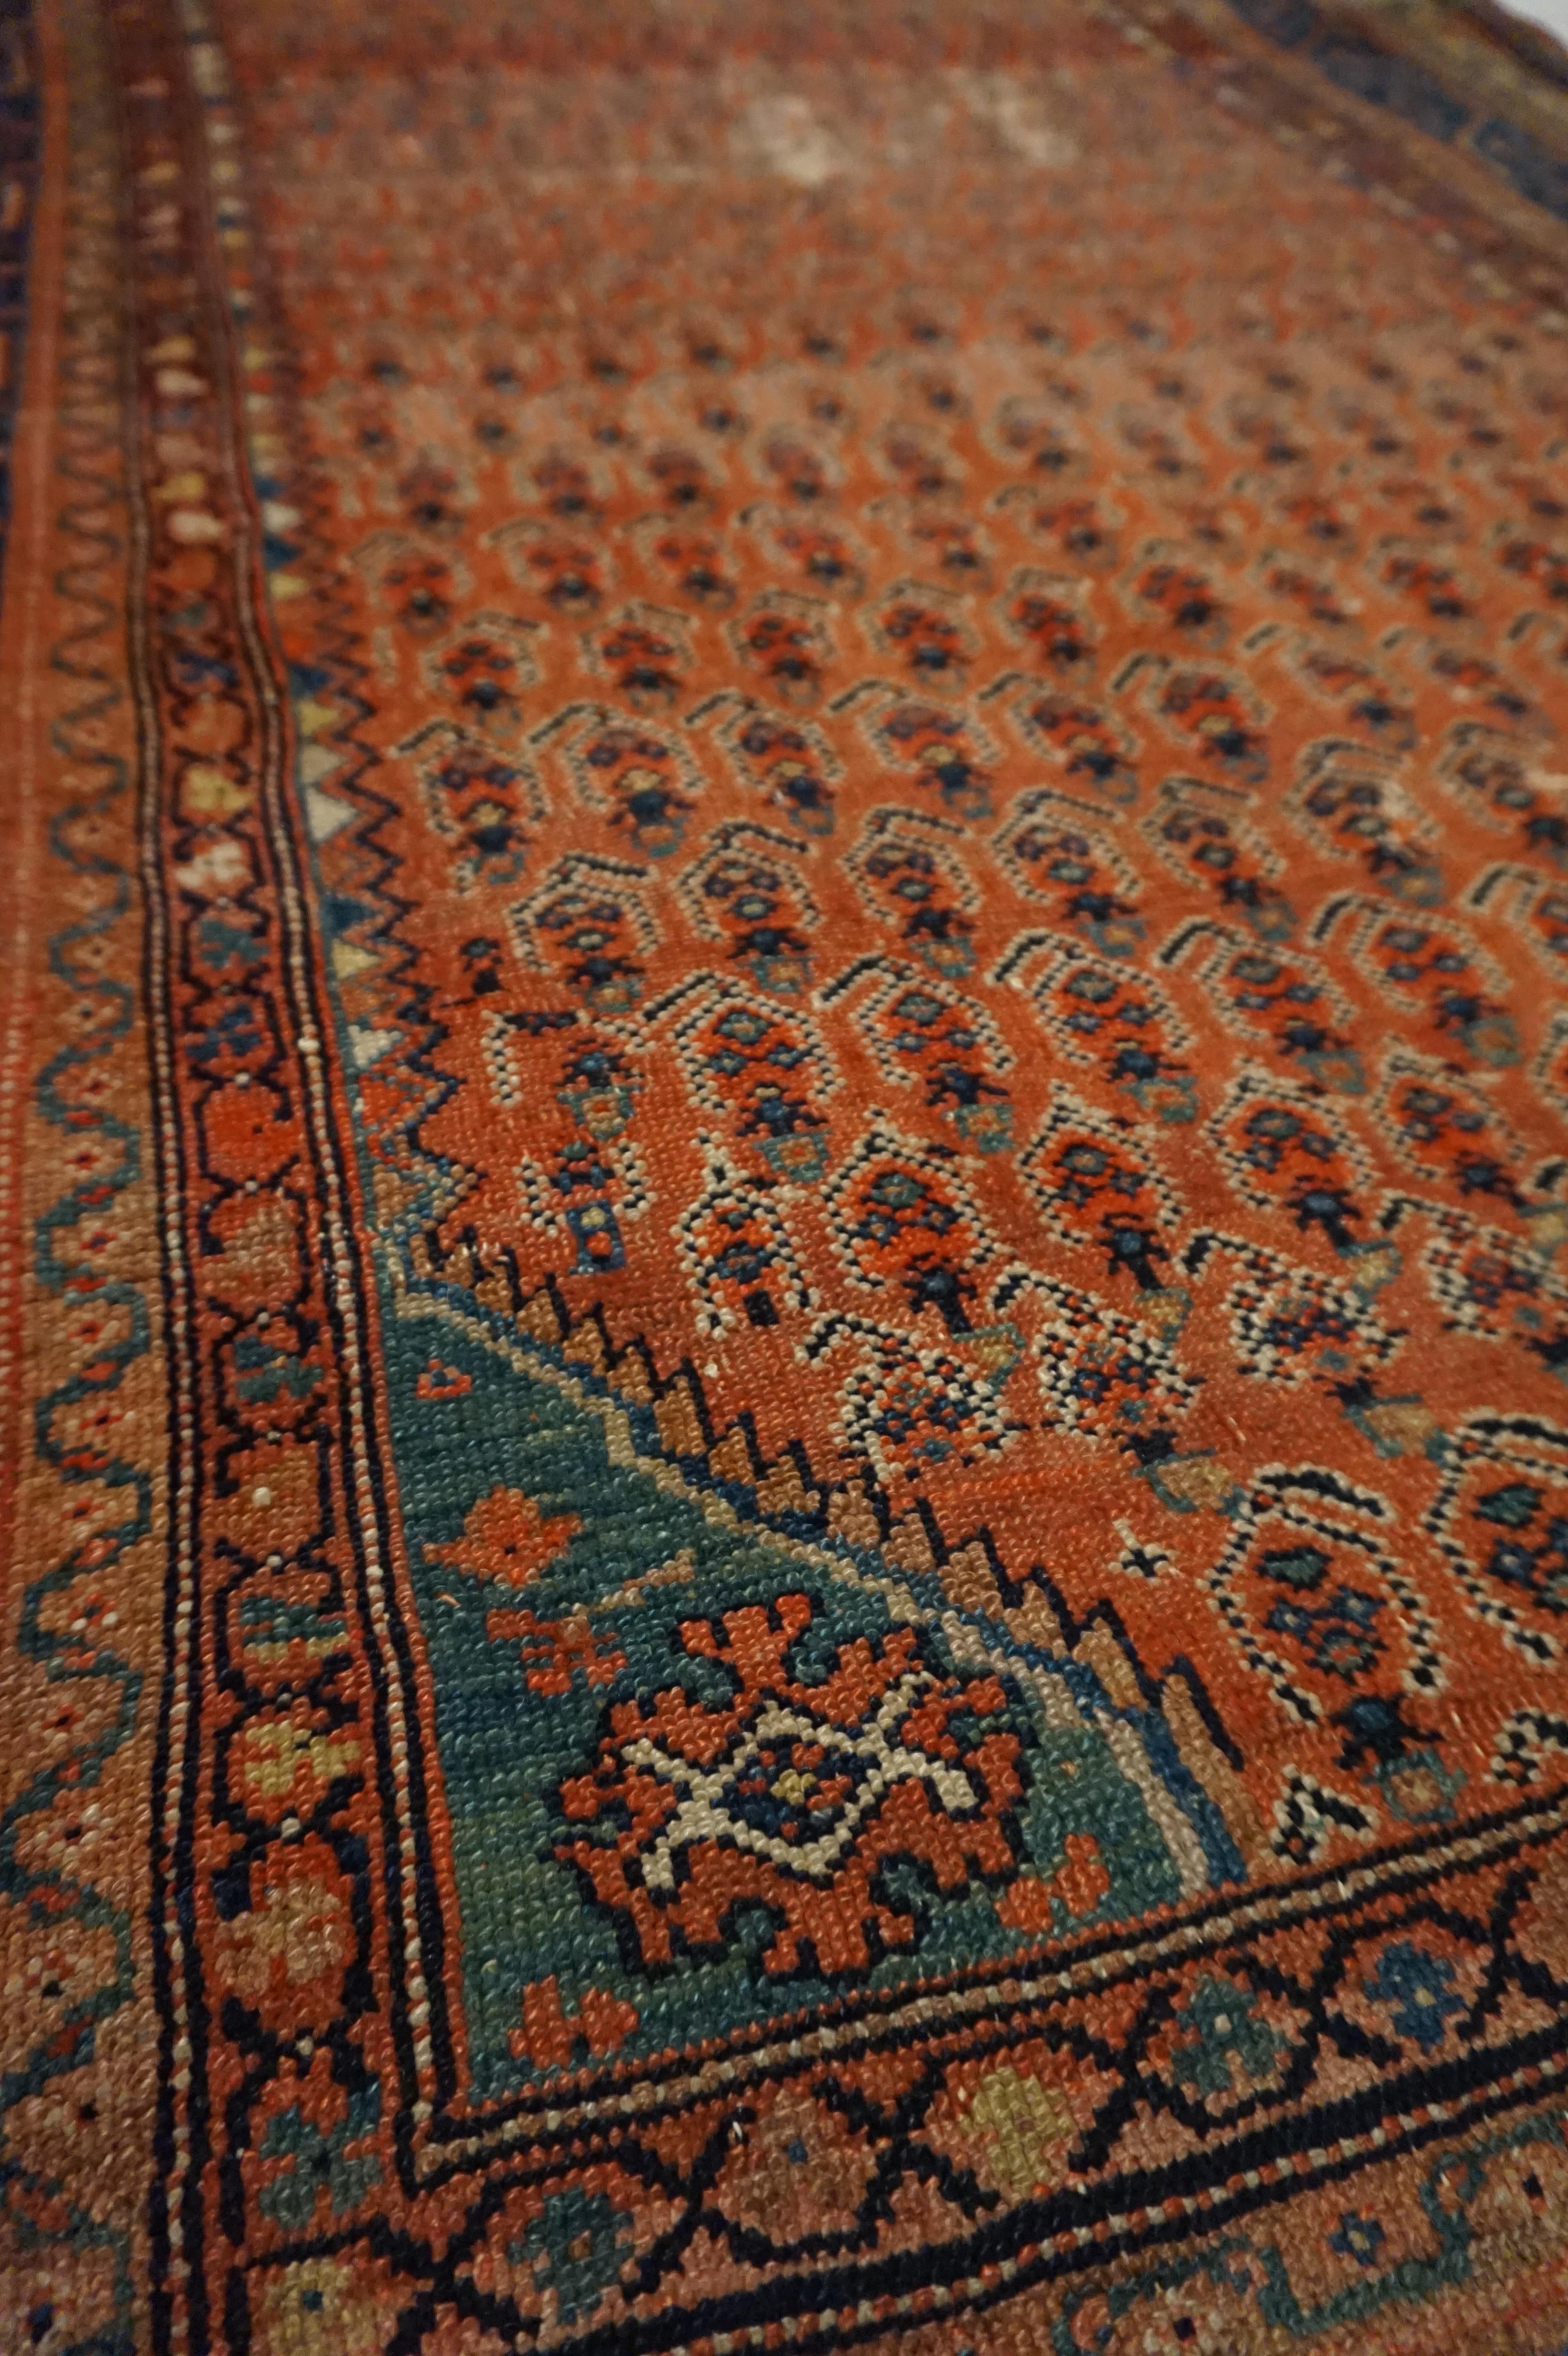 Late 19th Century 19th Century Tribal Boteh Paisley Hand-knotted Rug In Rust Hues For Sale